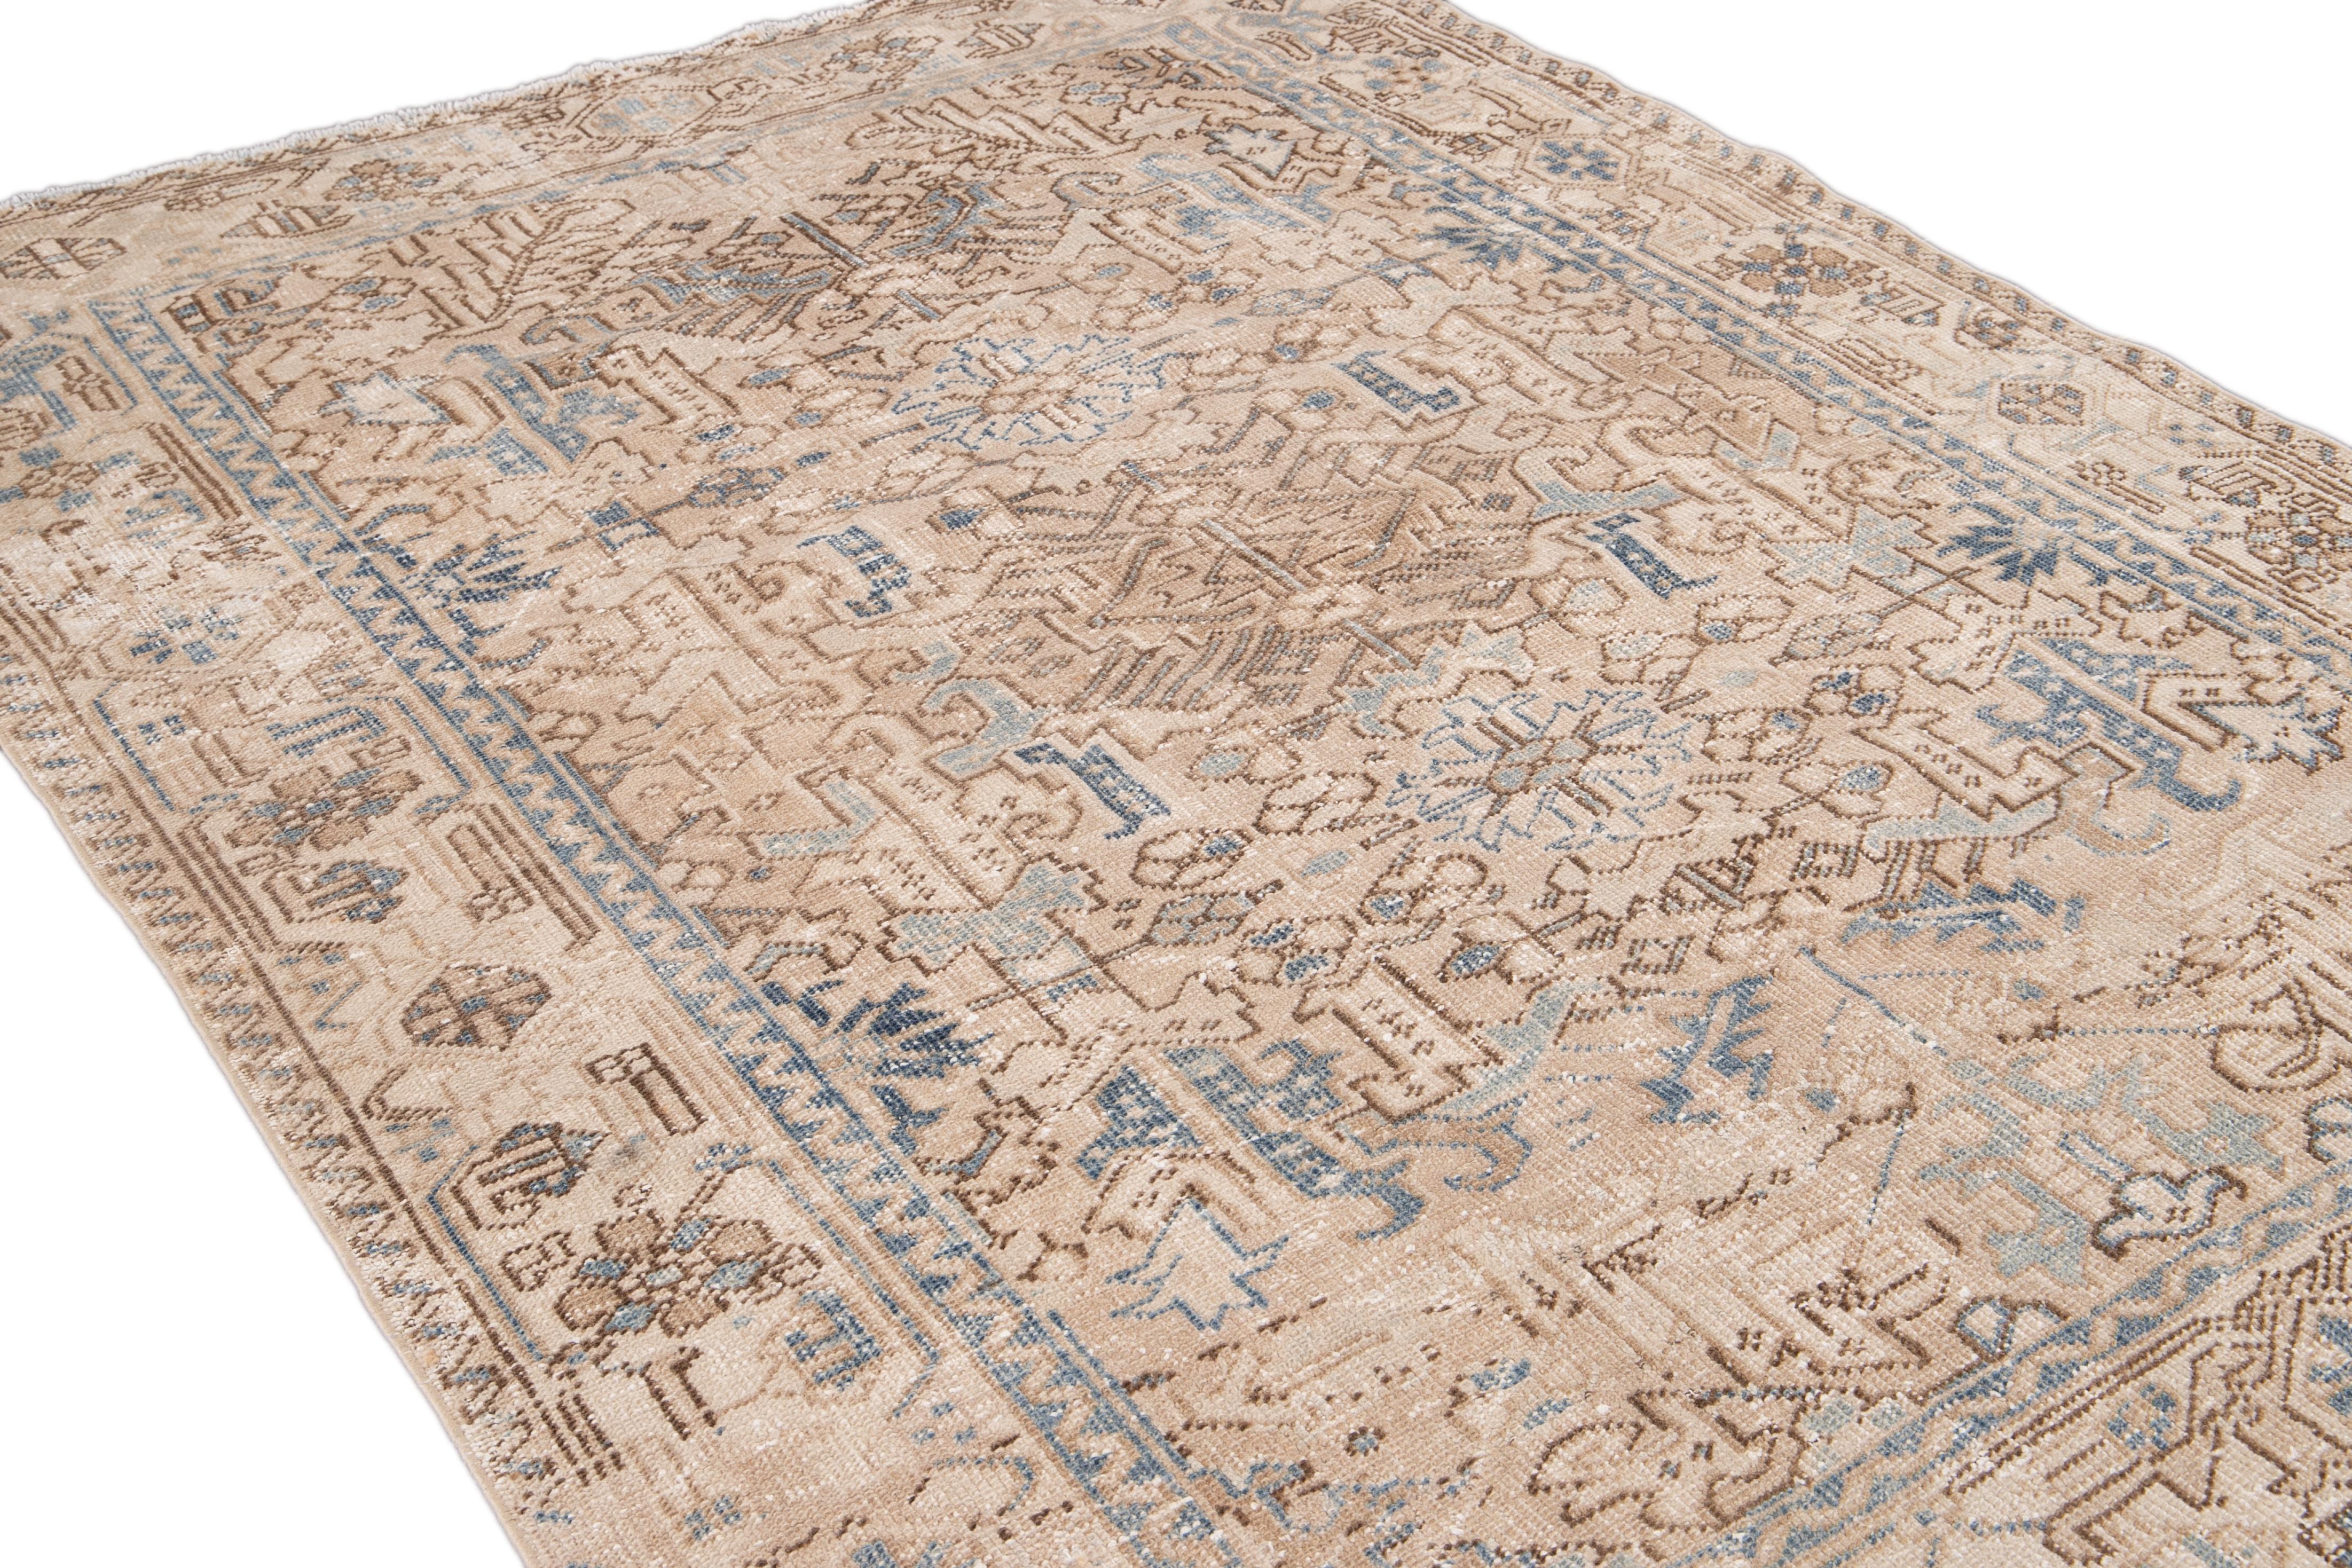 Early 20th Century Antique Heriz Handmade Shabby Chic Wool Rug For Sale